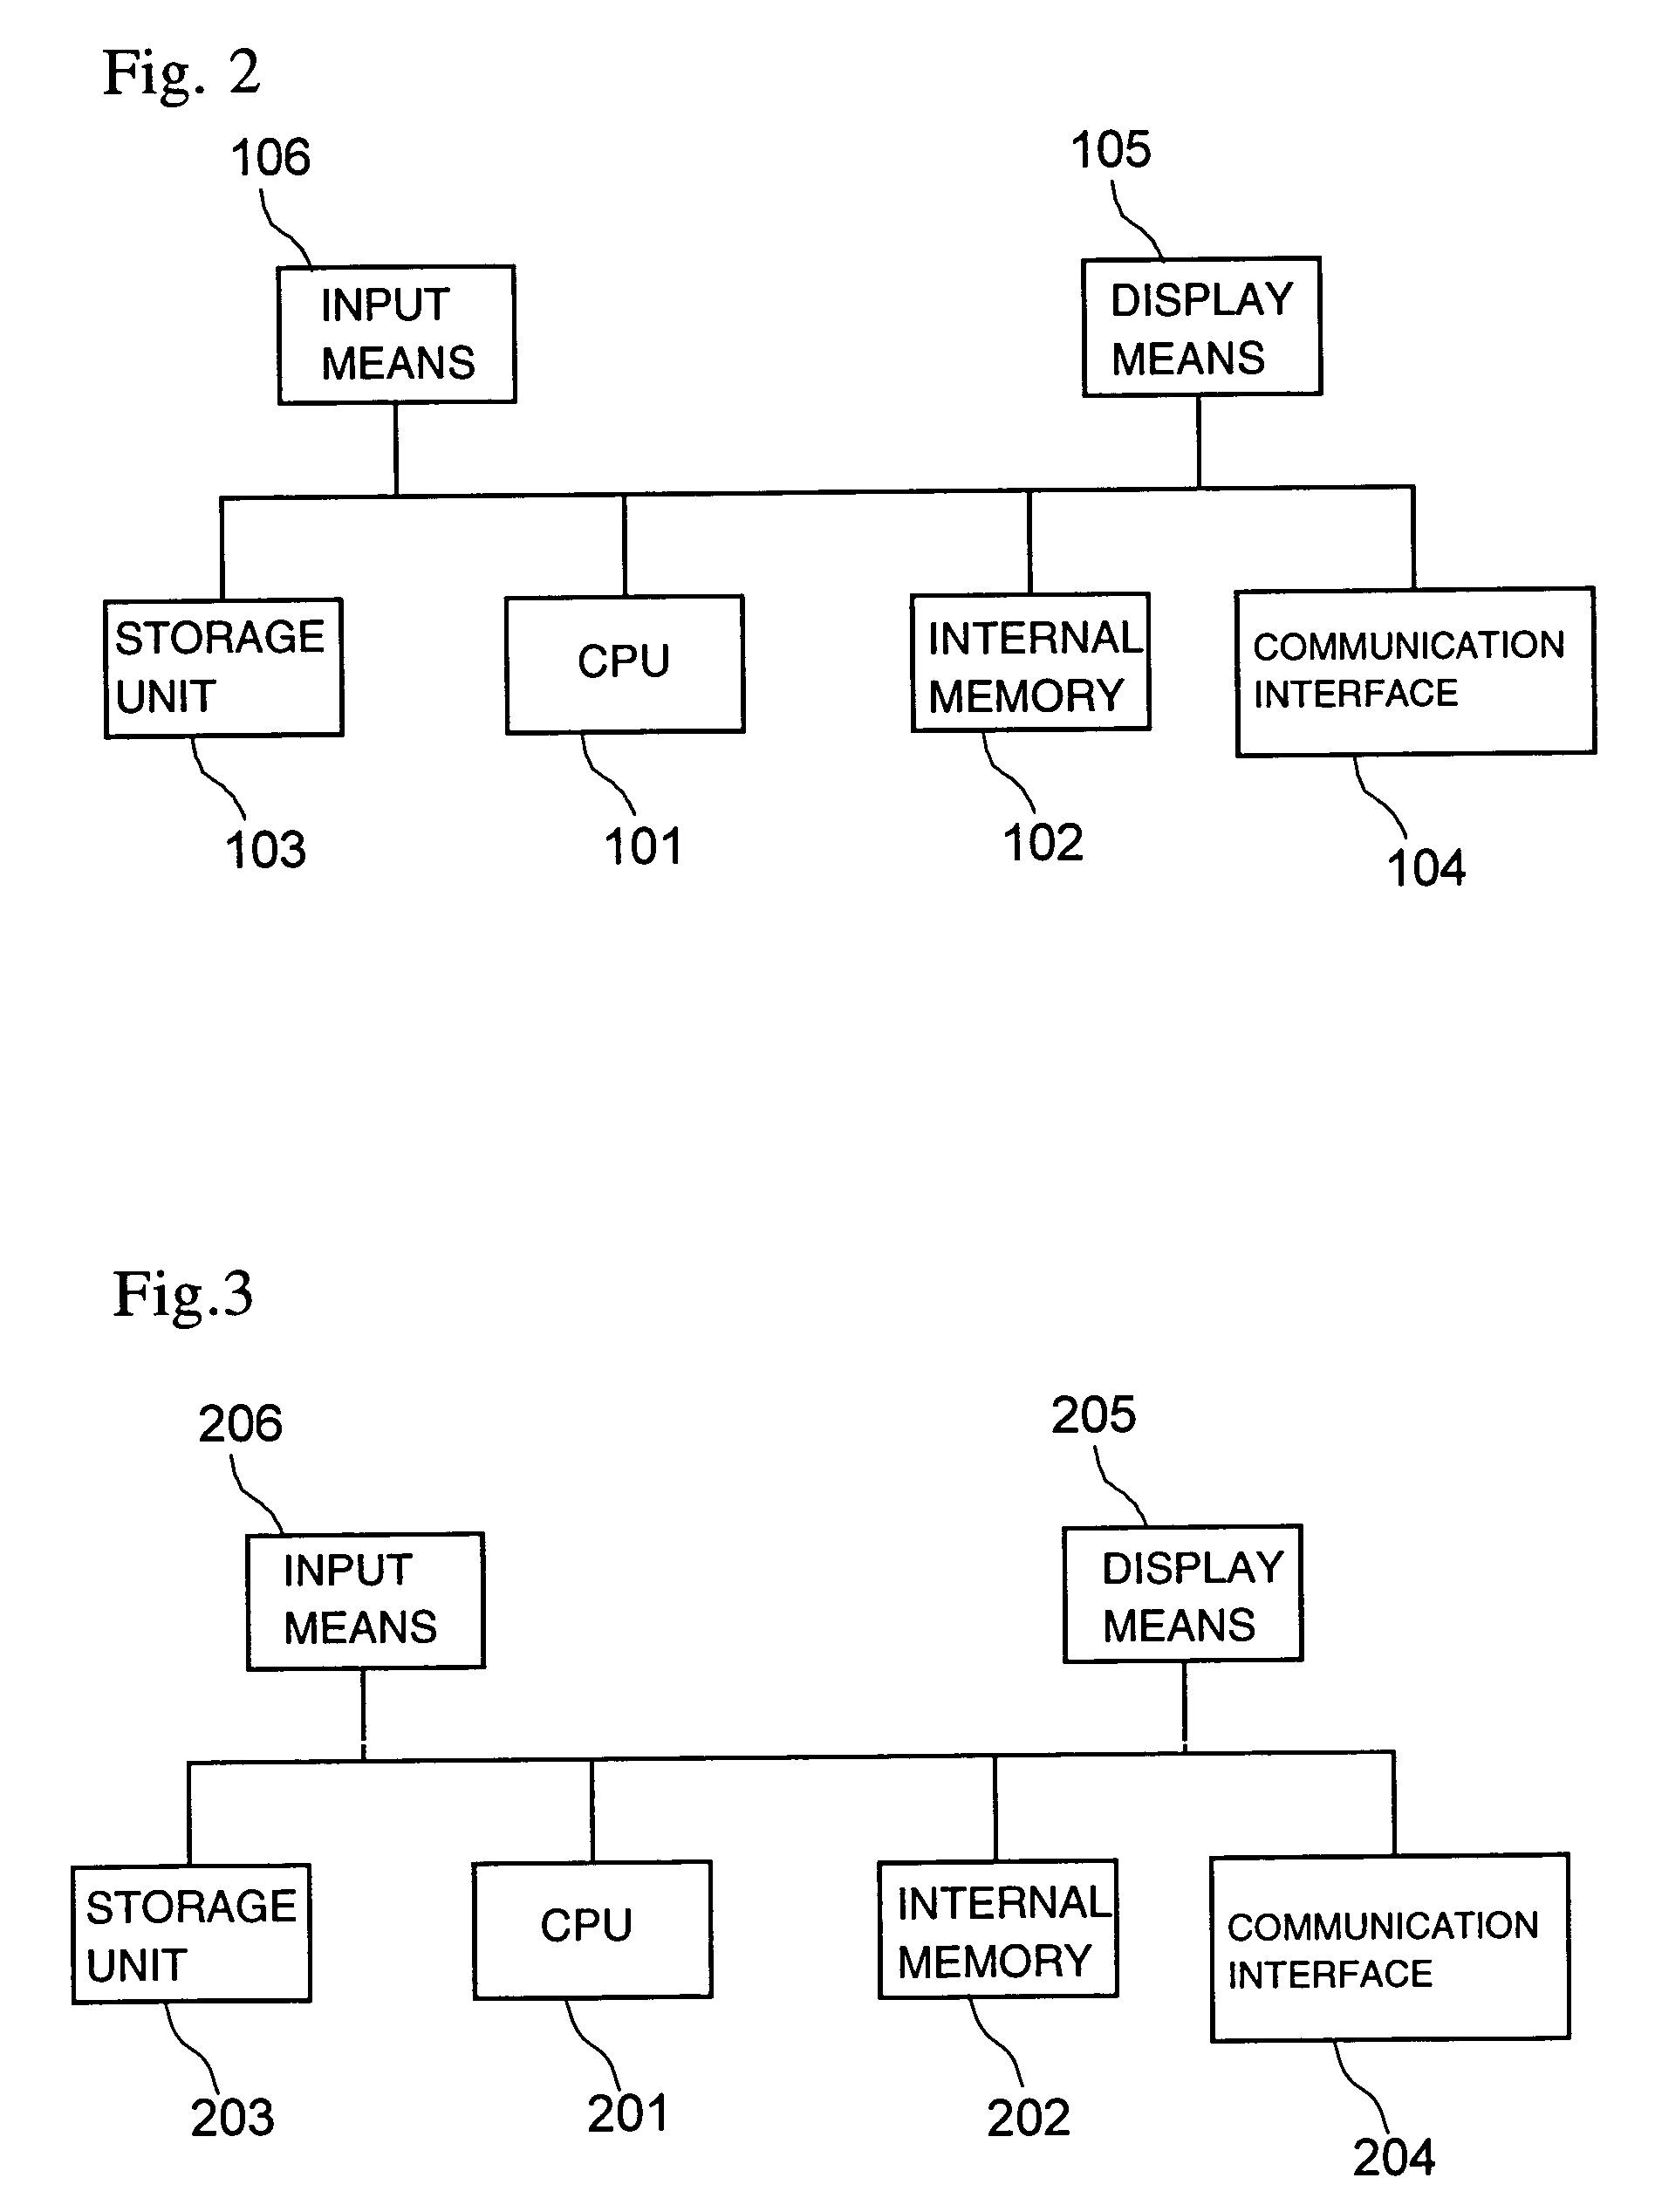 Functional object data, functional object imaging system, and object data transmitting unit, object data receiving unit and managing unit for use in the functional object imaging system